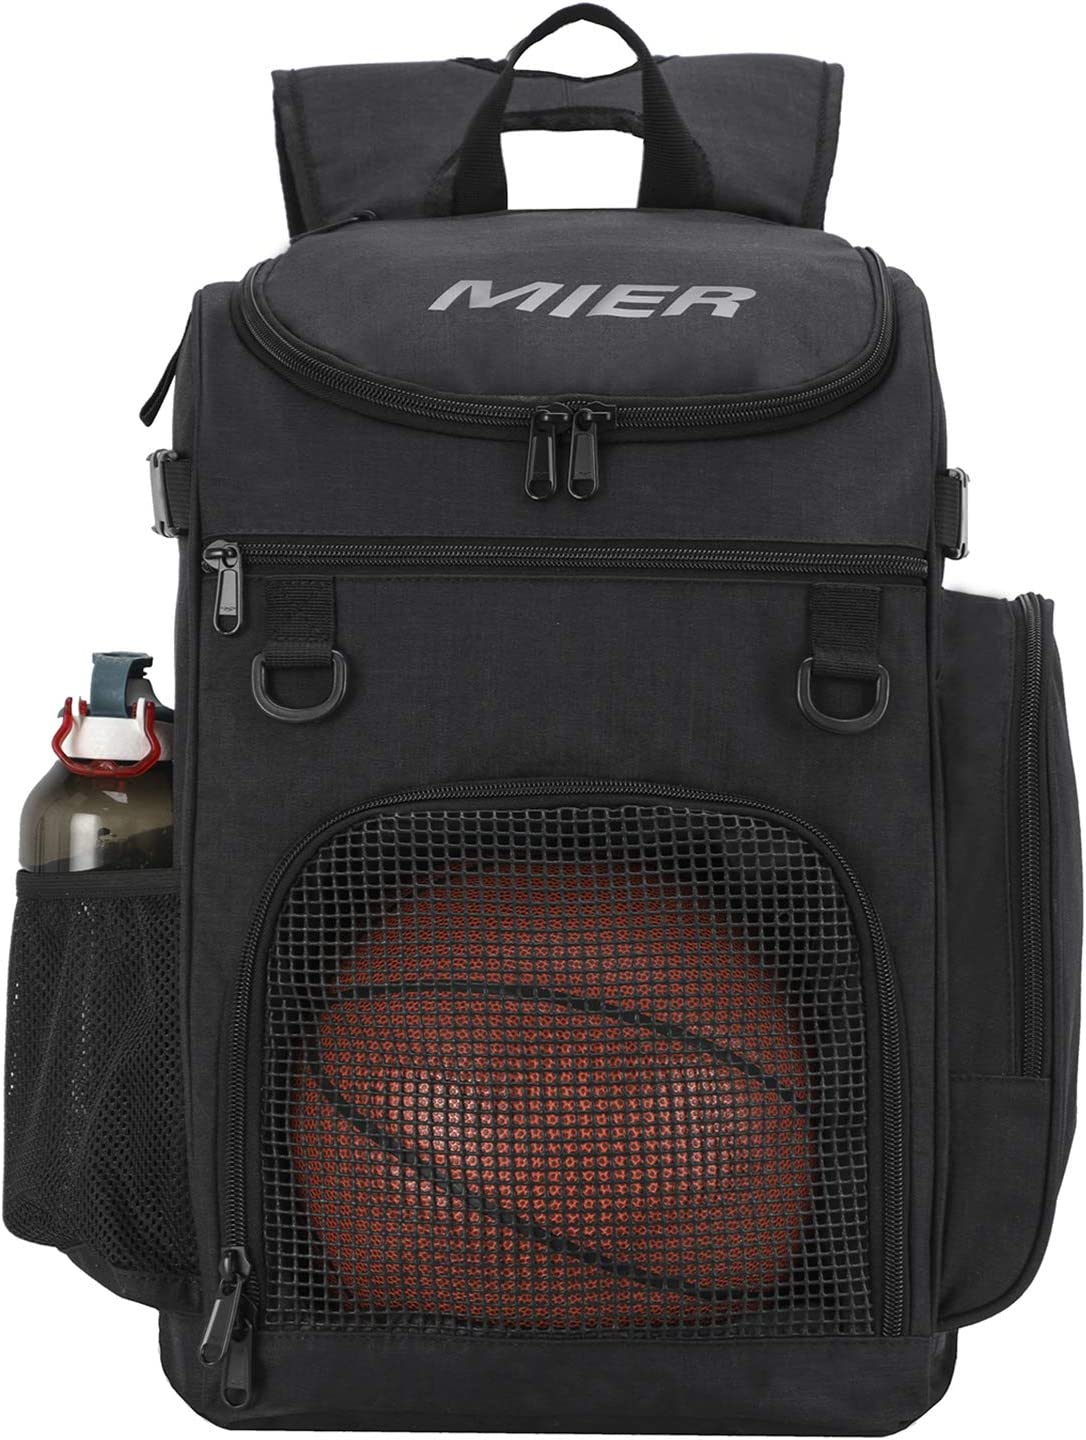  8. MIER Basketball Bag -with Laptop Compartment 